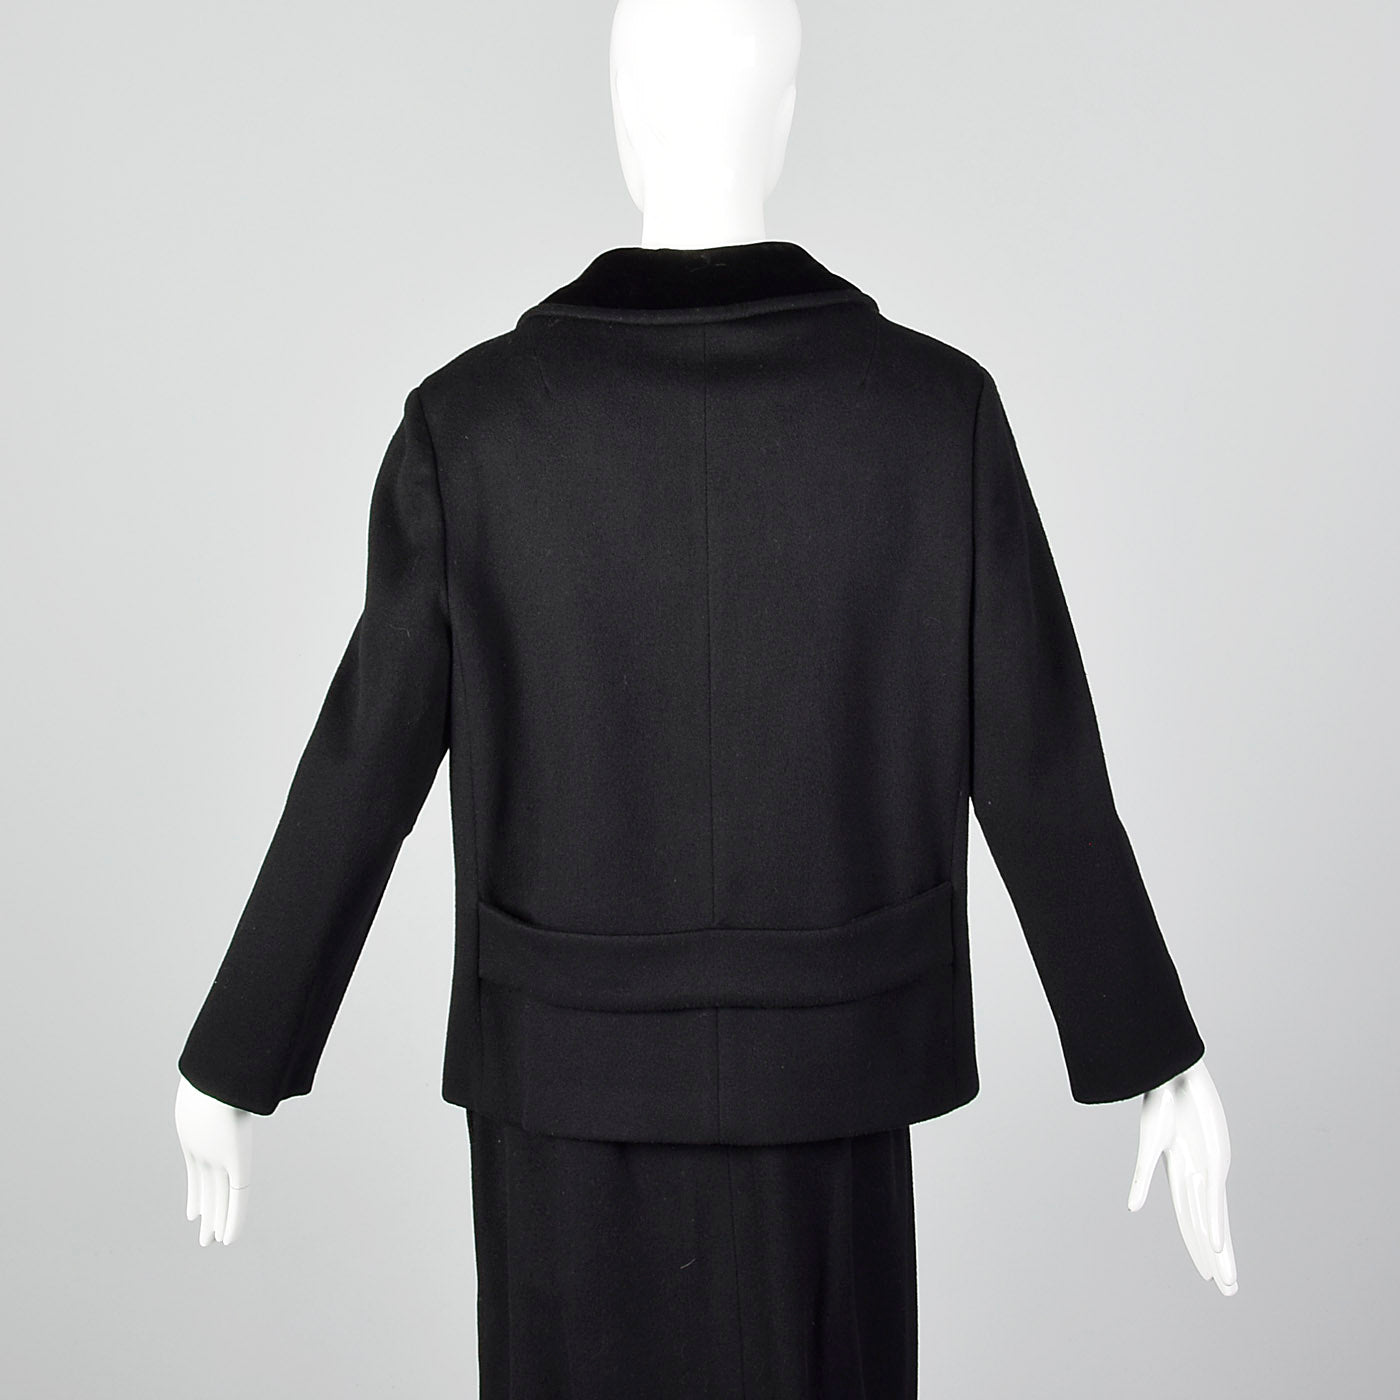 1960s Black Winter Skirt Suit with Boxy Jacket and Pencil Skirt